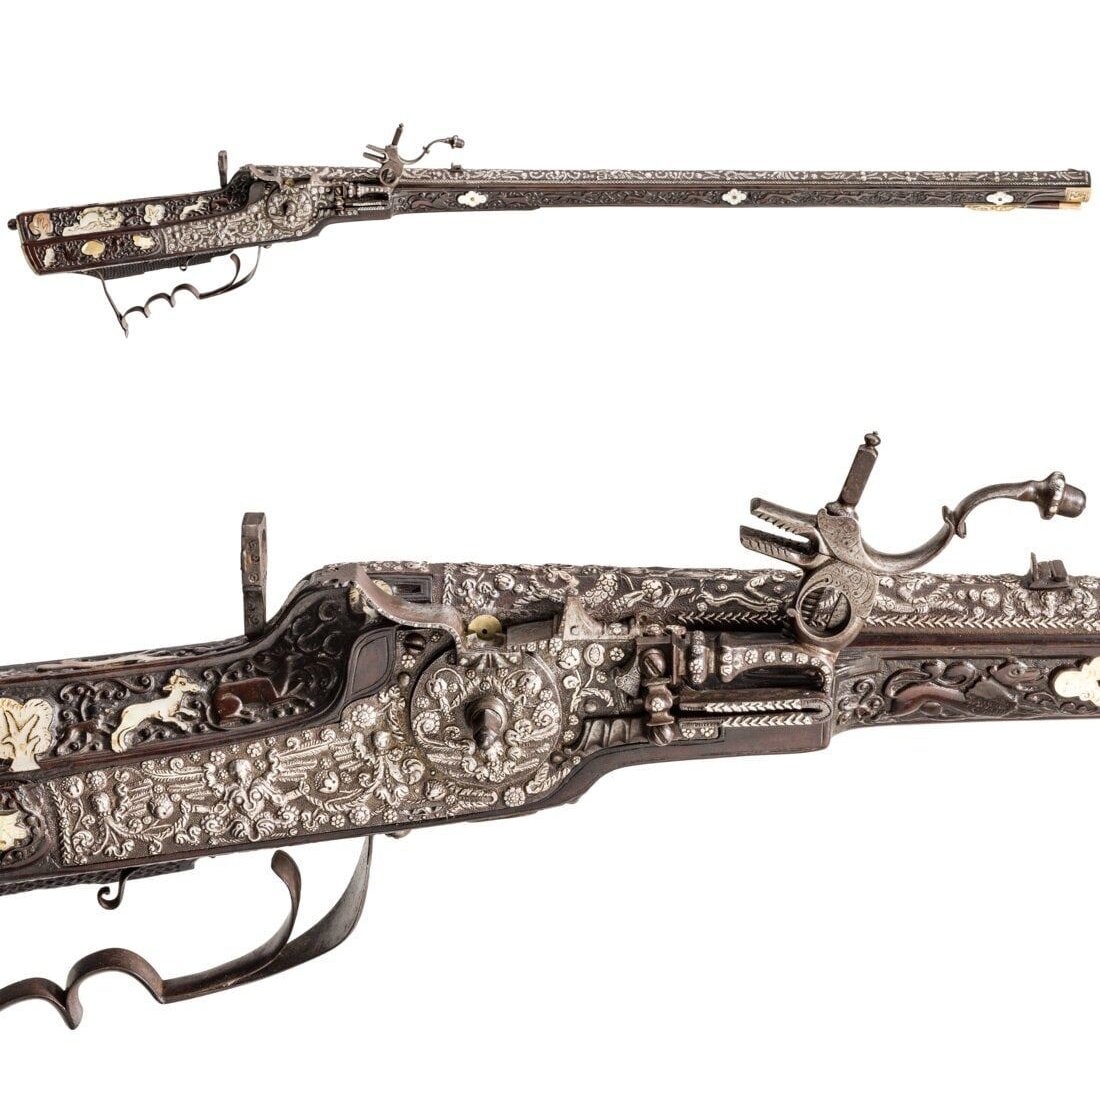 Circa-1650 deluxe wheellock rifle with silver and mother-of-pearl inlays, made for Ferdinand III of Austria and featuring embellishments by the artisan known as the Master of the Animal-Head Scroll, estimated at €35,000-€70,000 ($37,430-$74,860) at Hermann Historica on May 16.